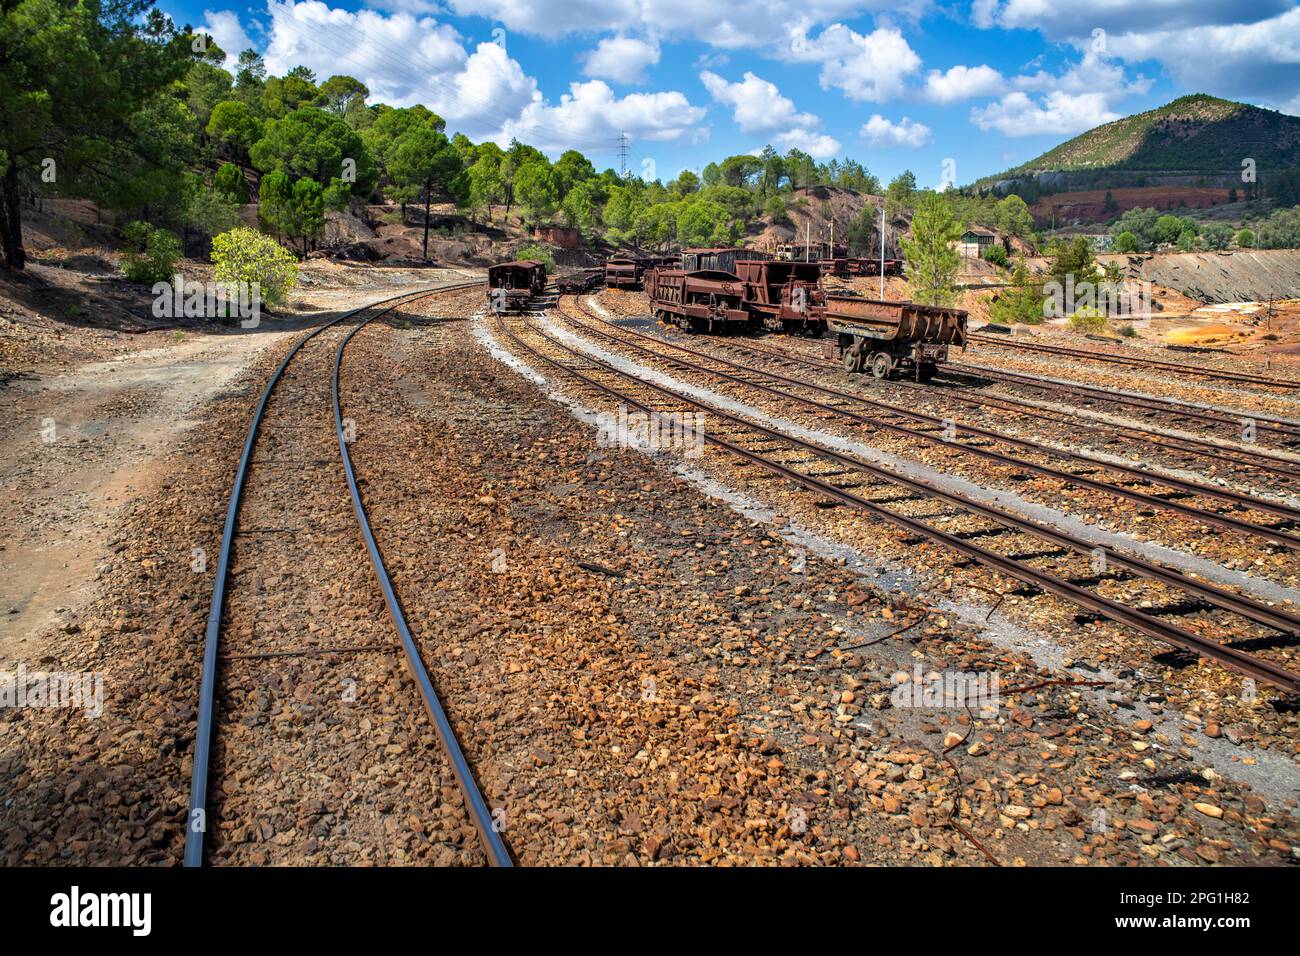 Old abandoned steam trains seen from the touristic train used for tourist trip through the RioTinto mining area, Huelva province, Spain.  The Rio Tint Stock Photo